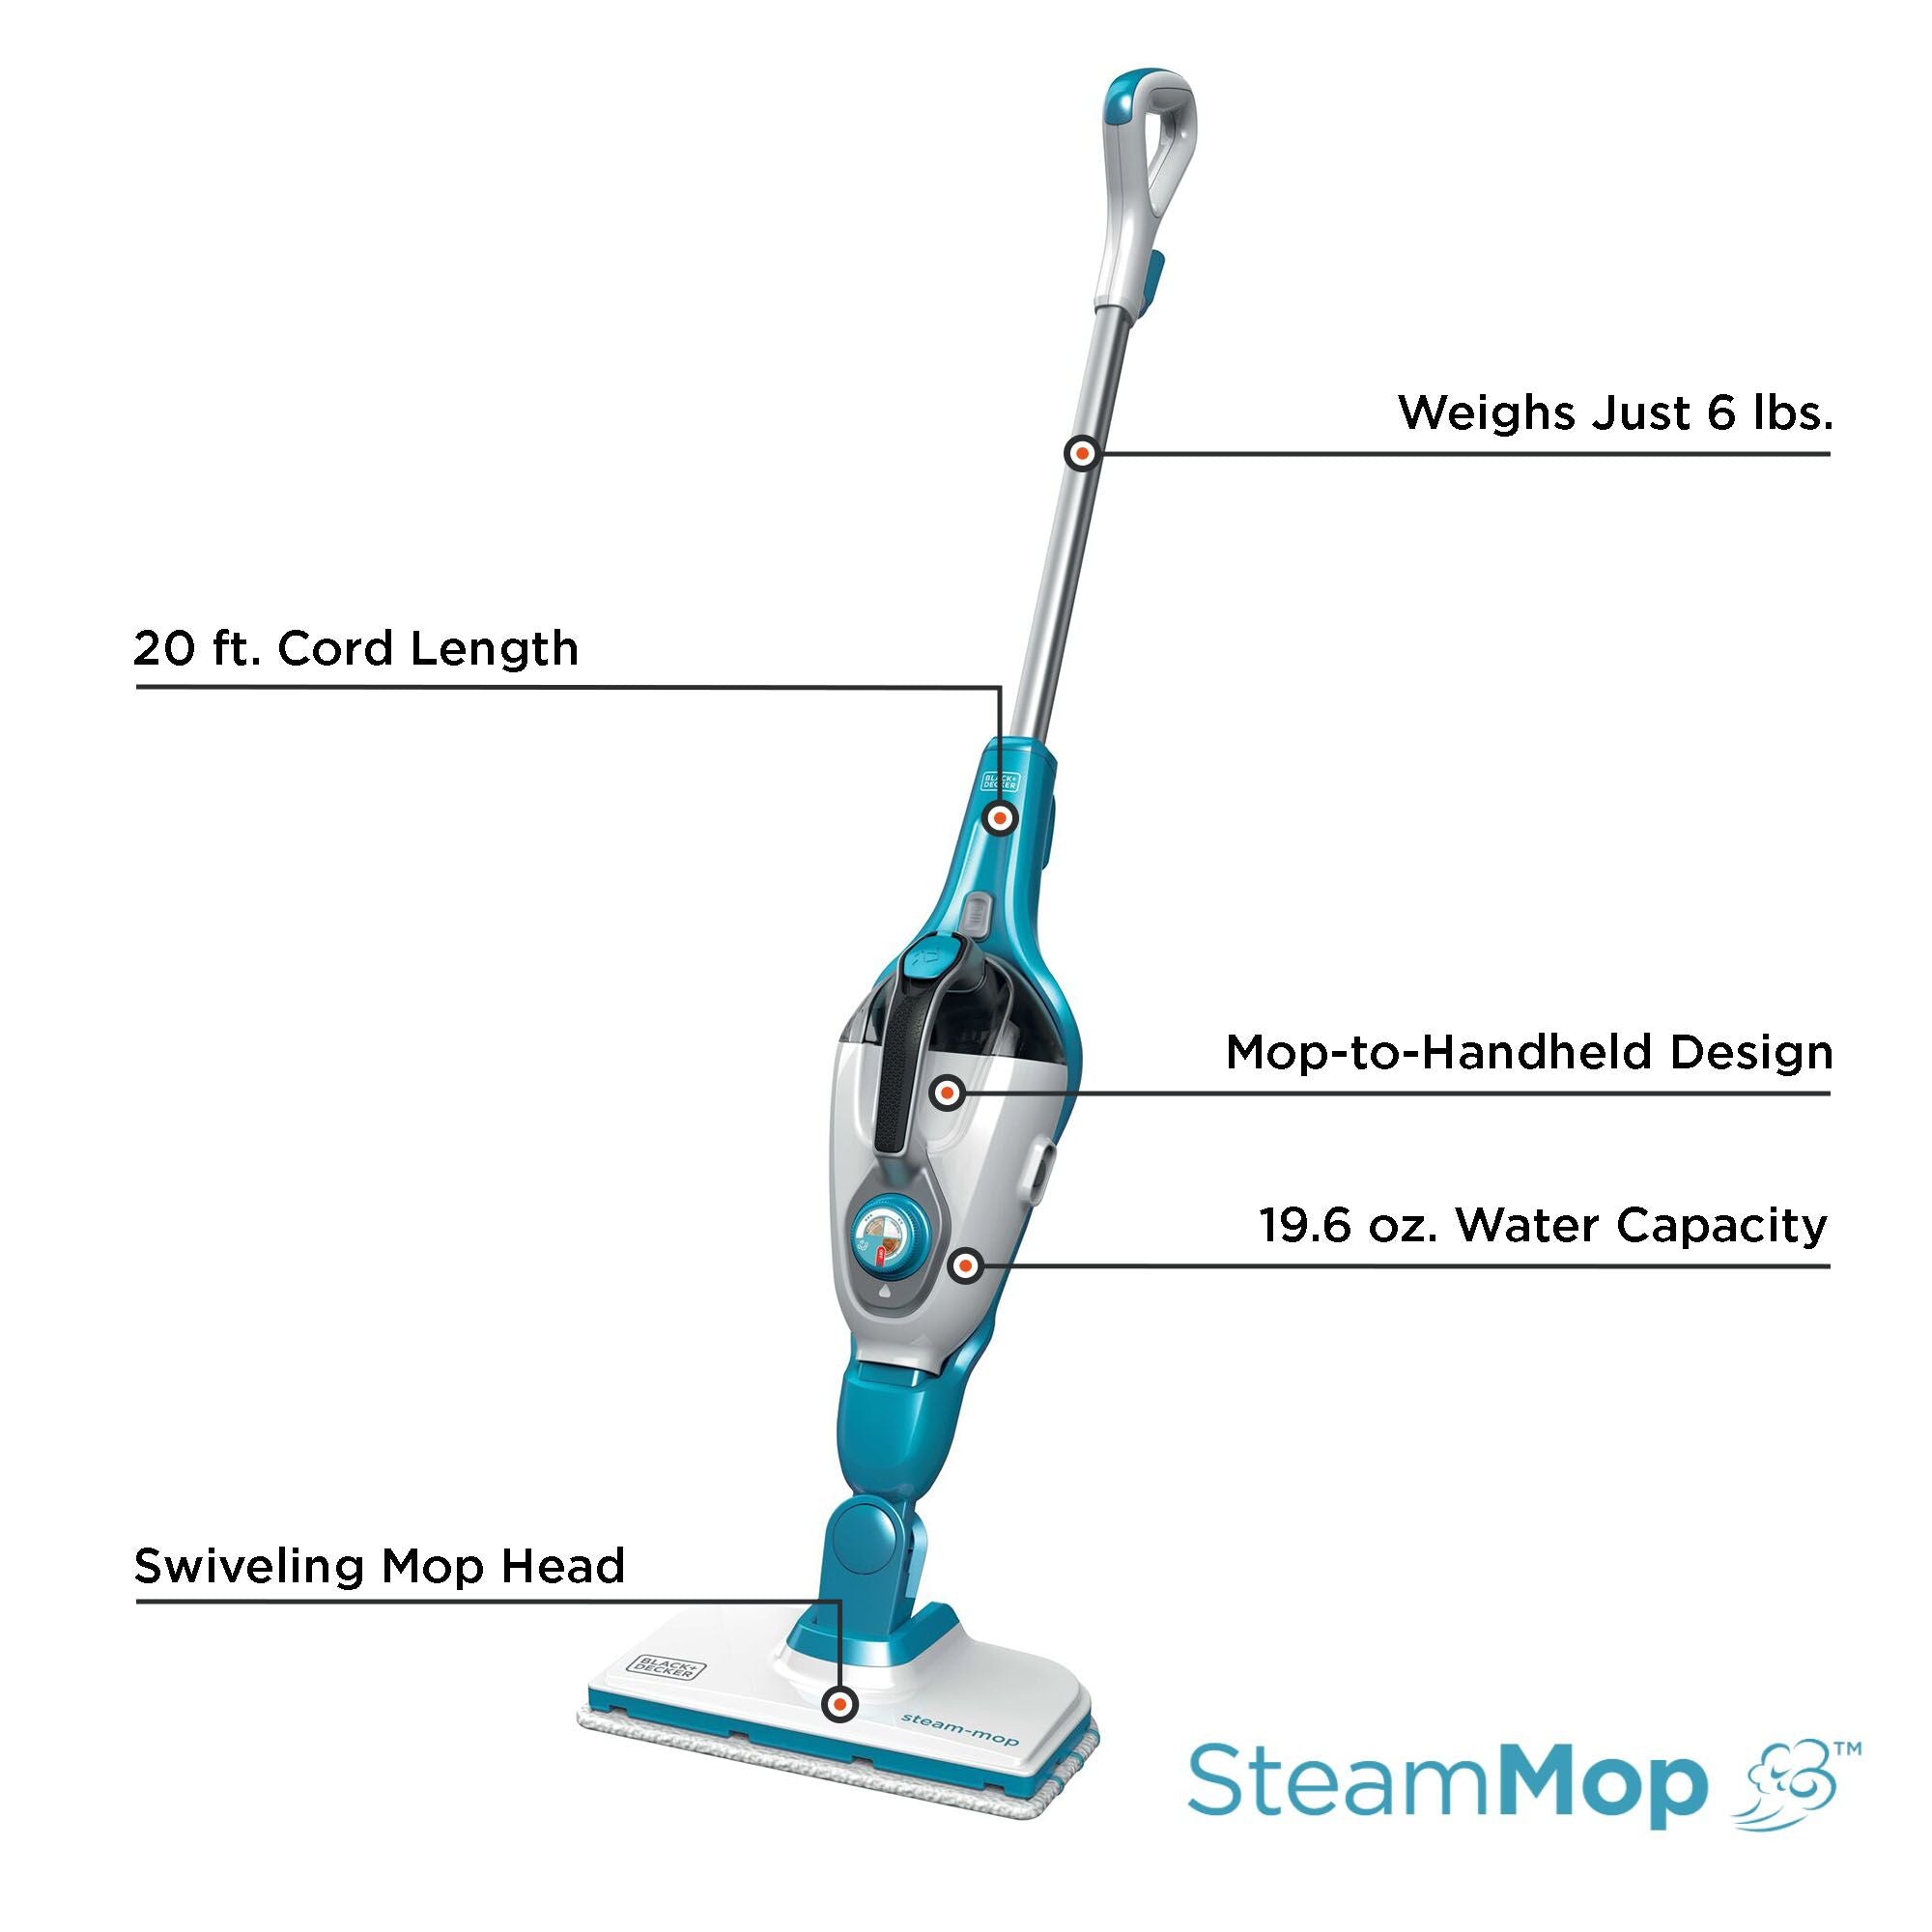 An overview of the BLACK+DECKER SteamMop™ 2-in-1 Corded Portable Steamer.